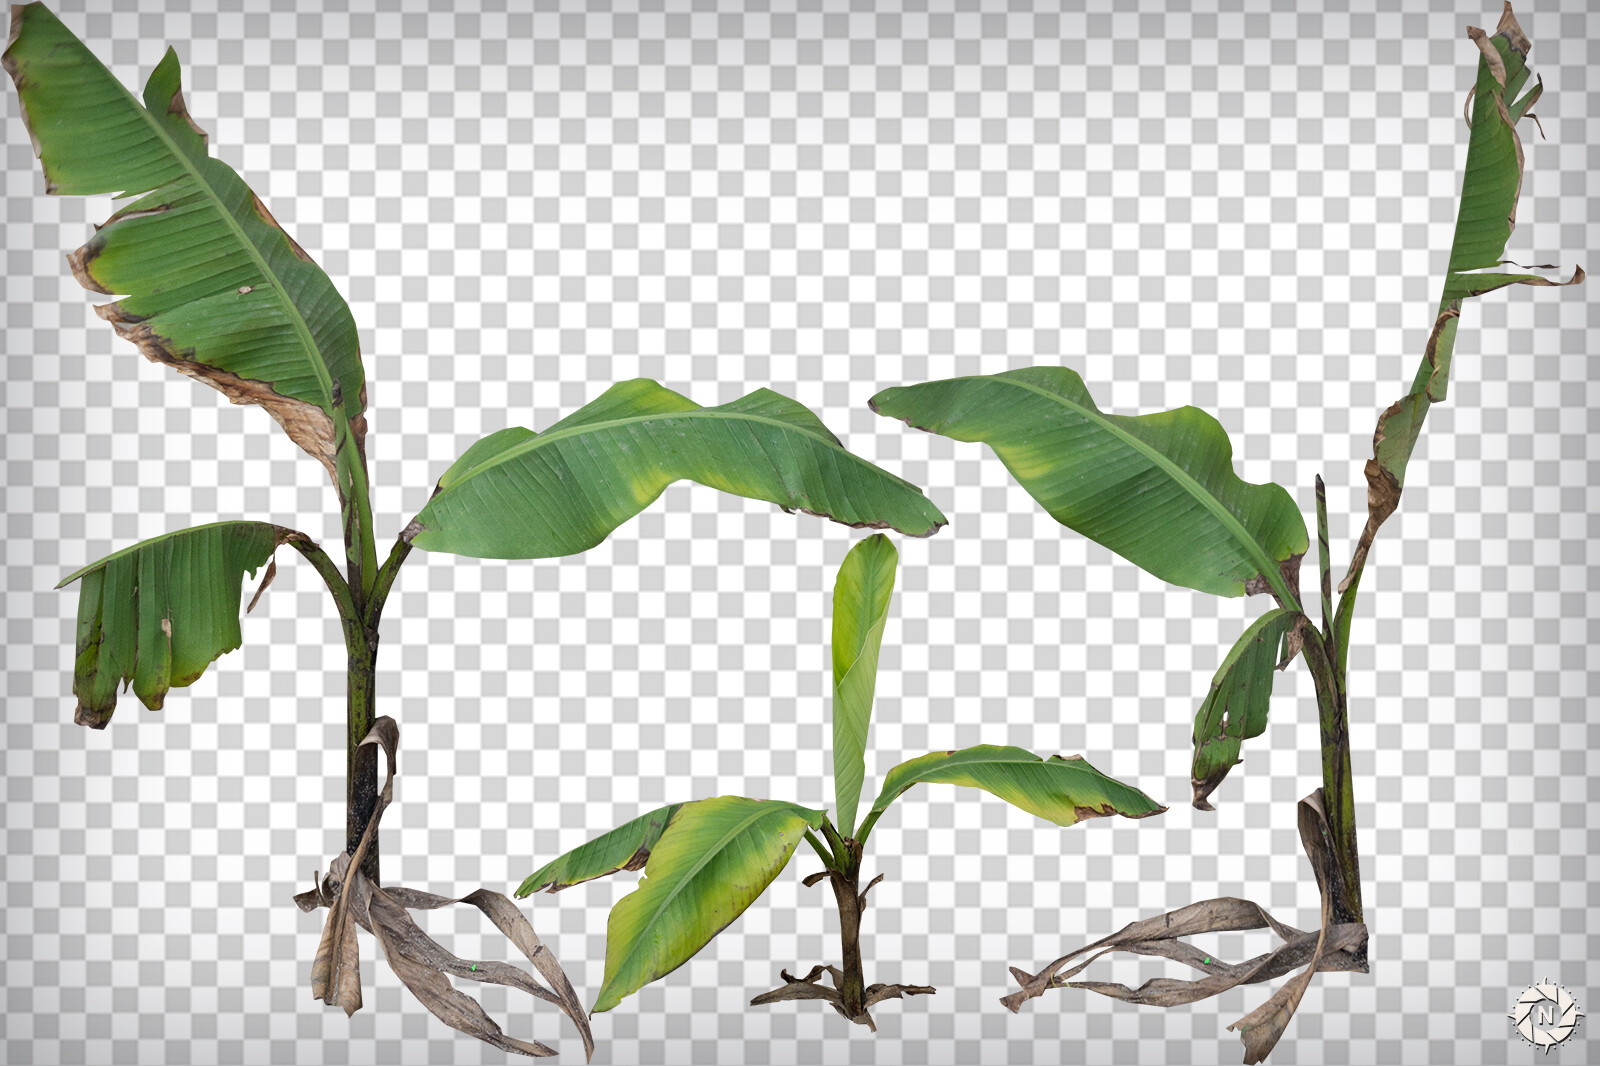 From the PNG Photo Pack: Small Foliage

https://www.artstation.com/a/165744